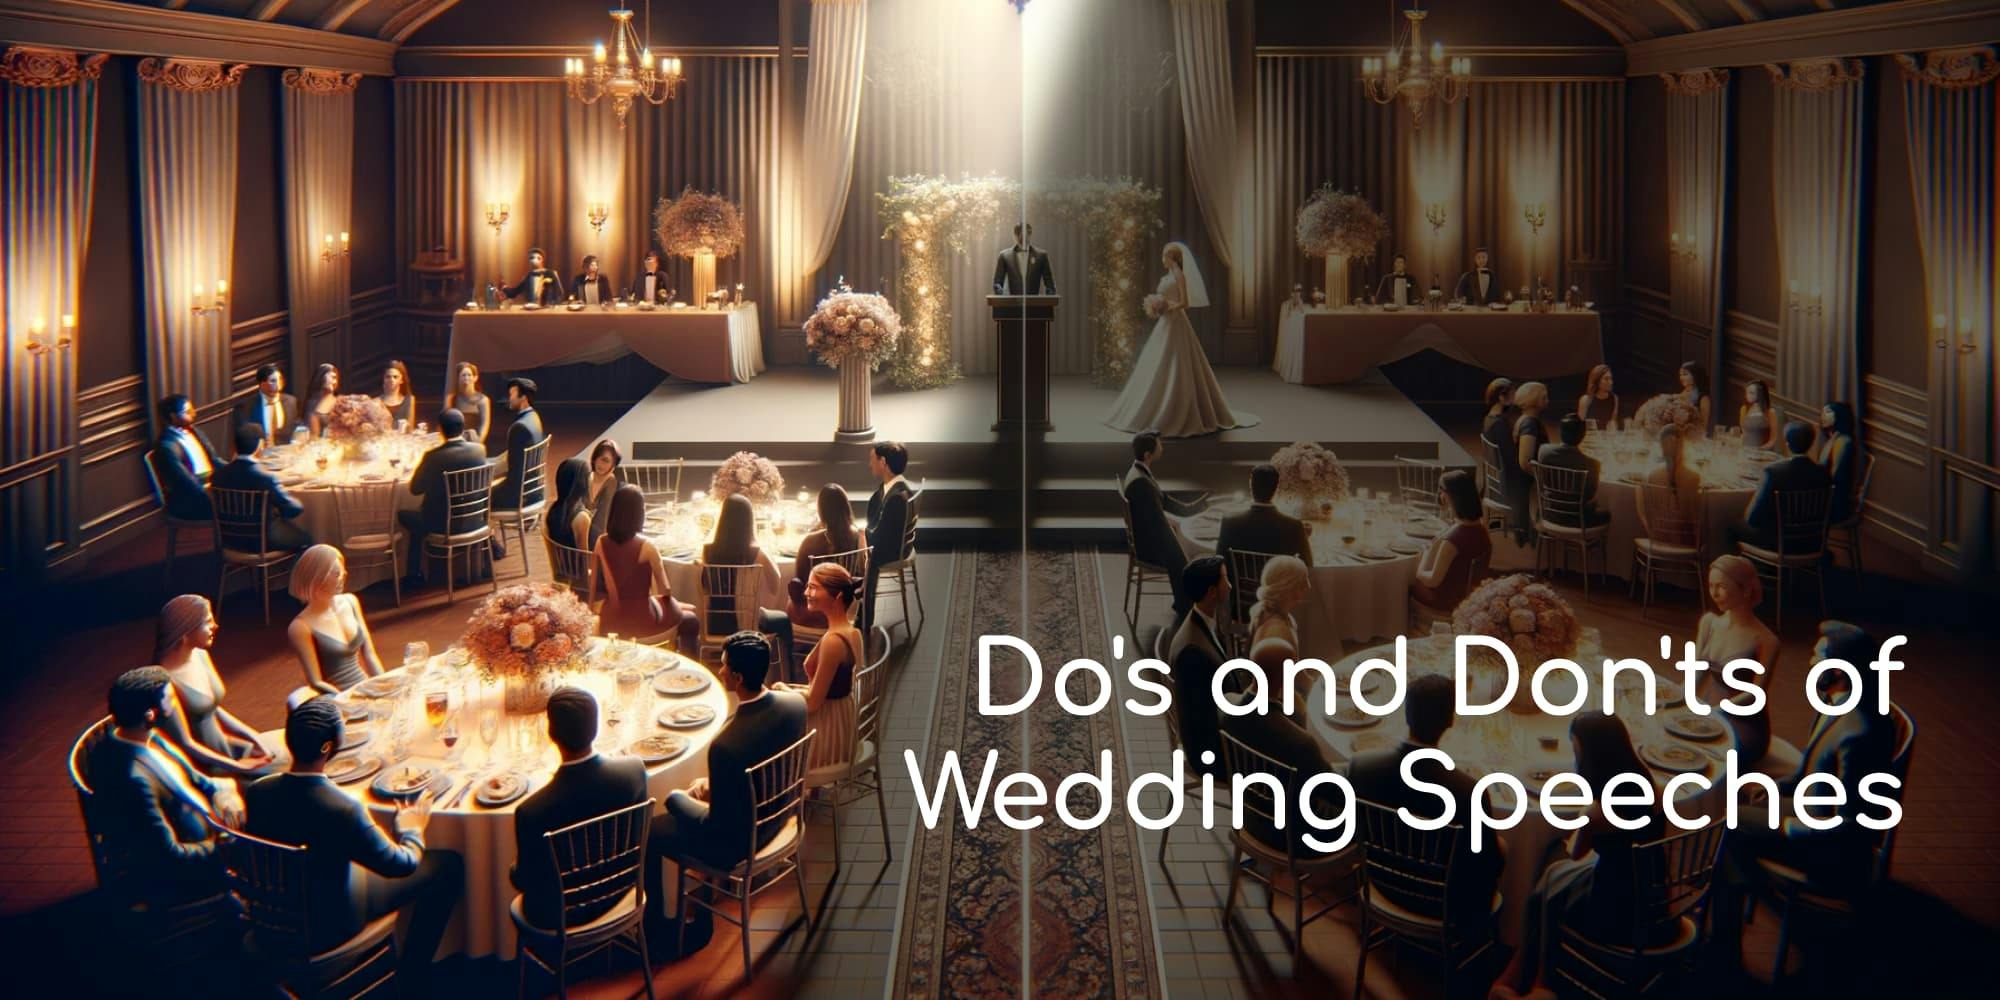 Discover who speaks at weddings and get tips for unforgettable bride, groom, best man, and parent speeches. Learn to write and deliver.